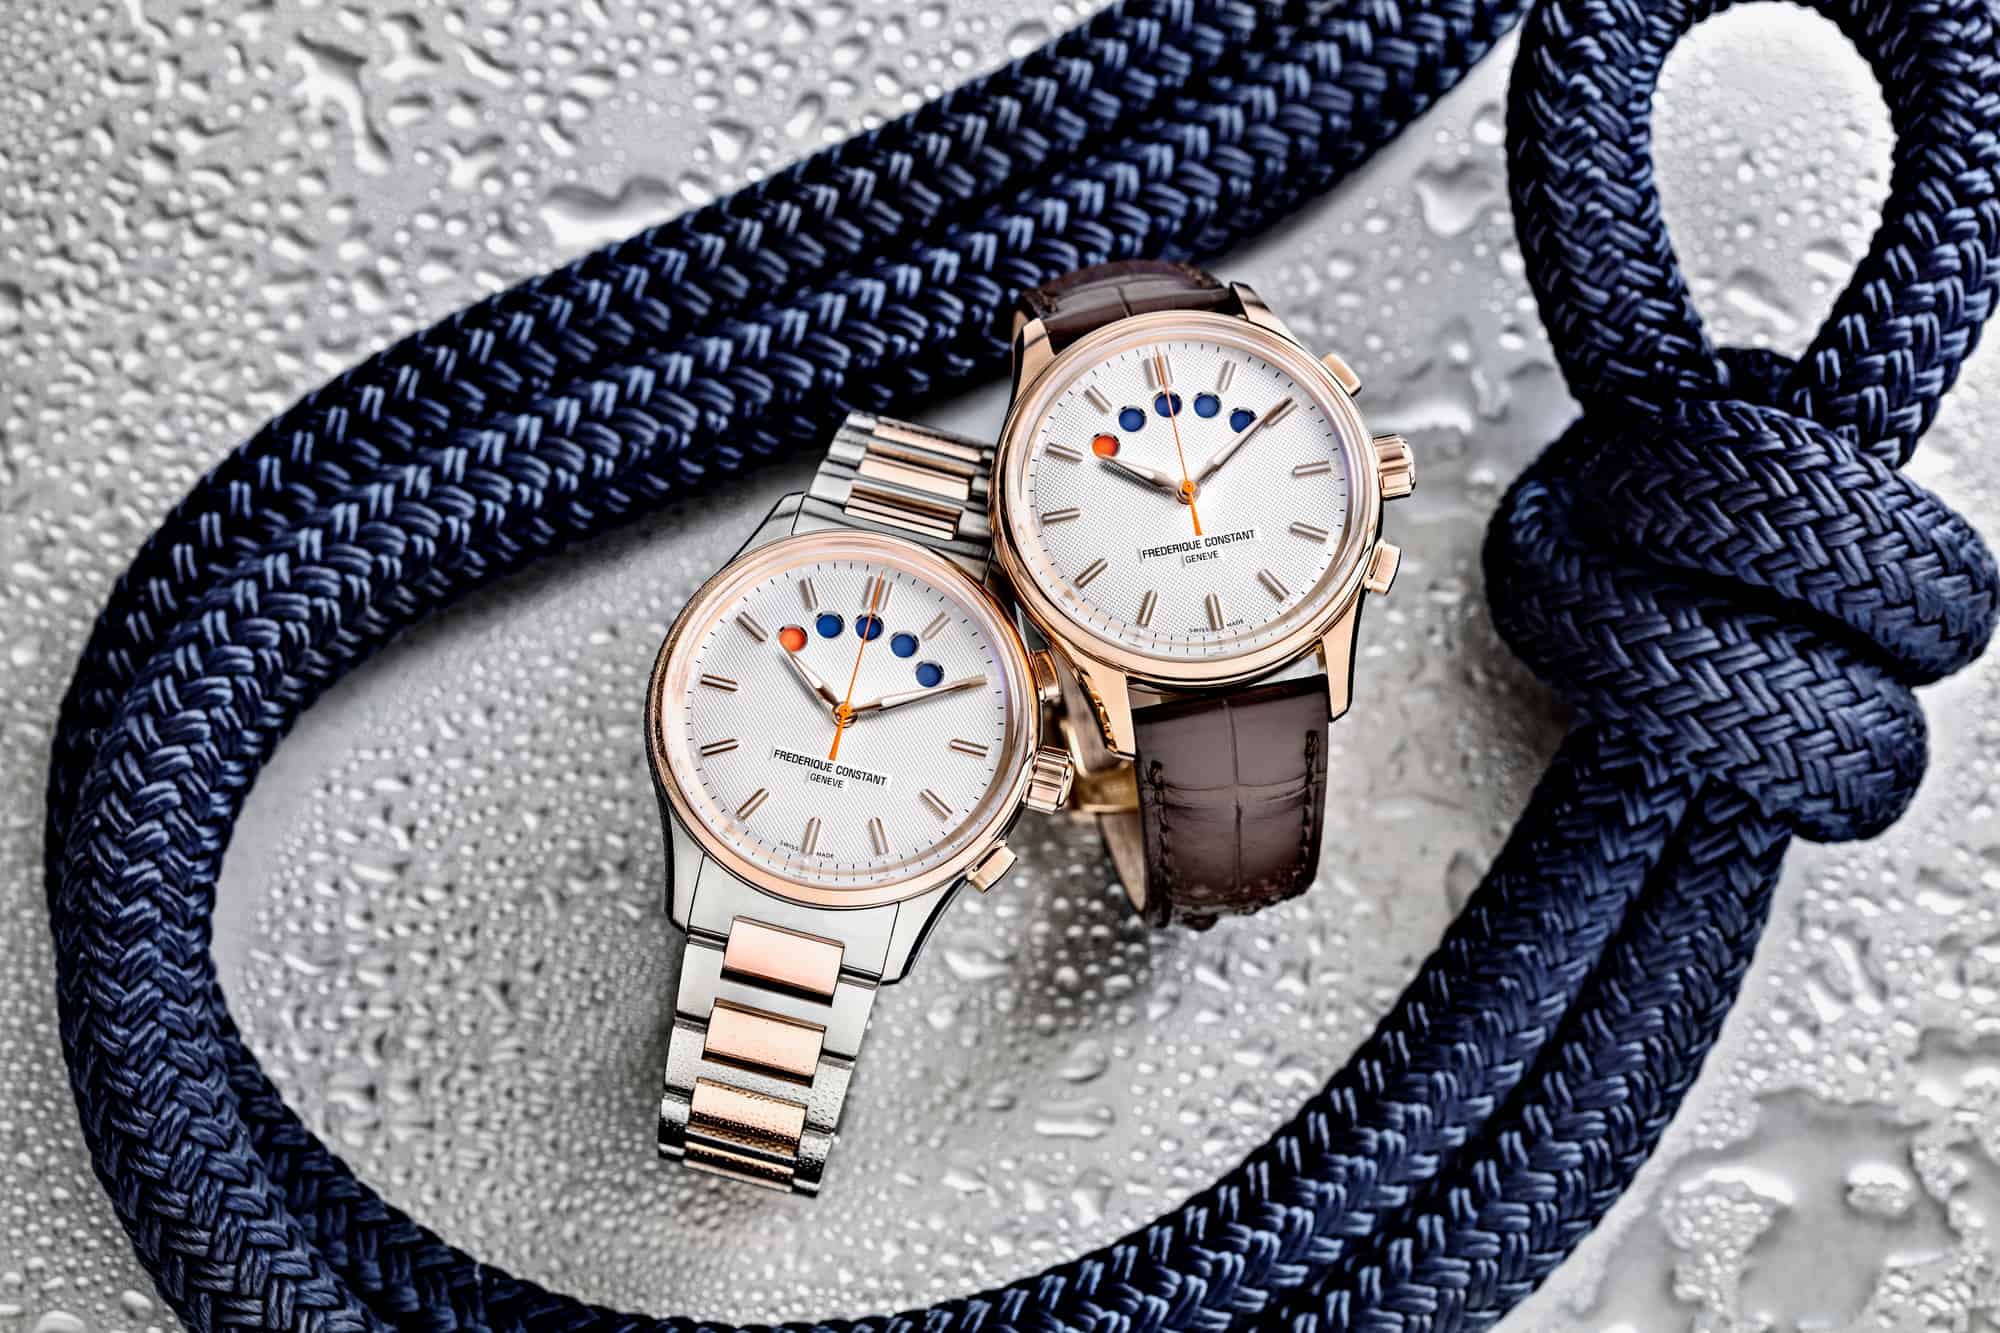 Introducing the Frederique Constant Yacht Timer Collection